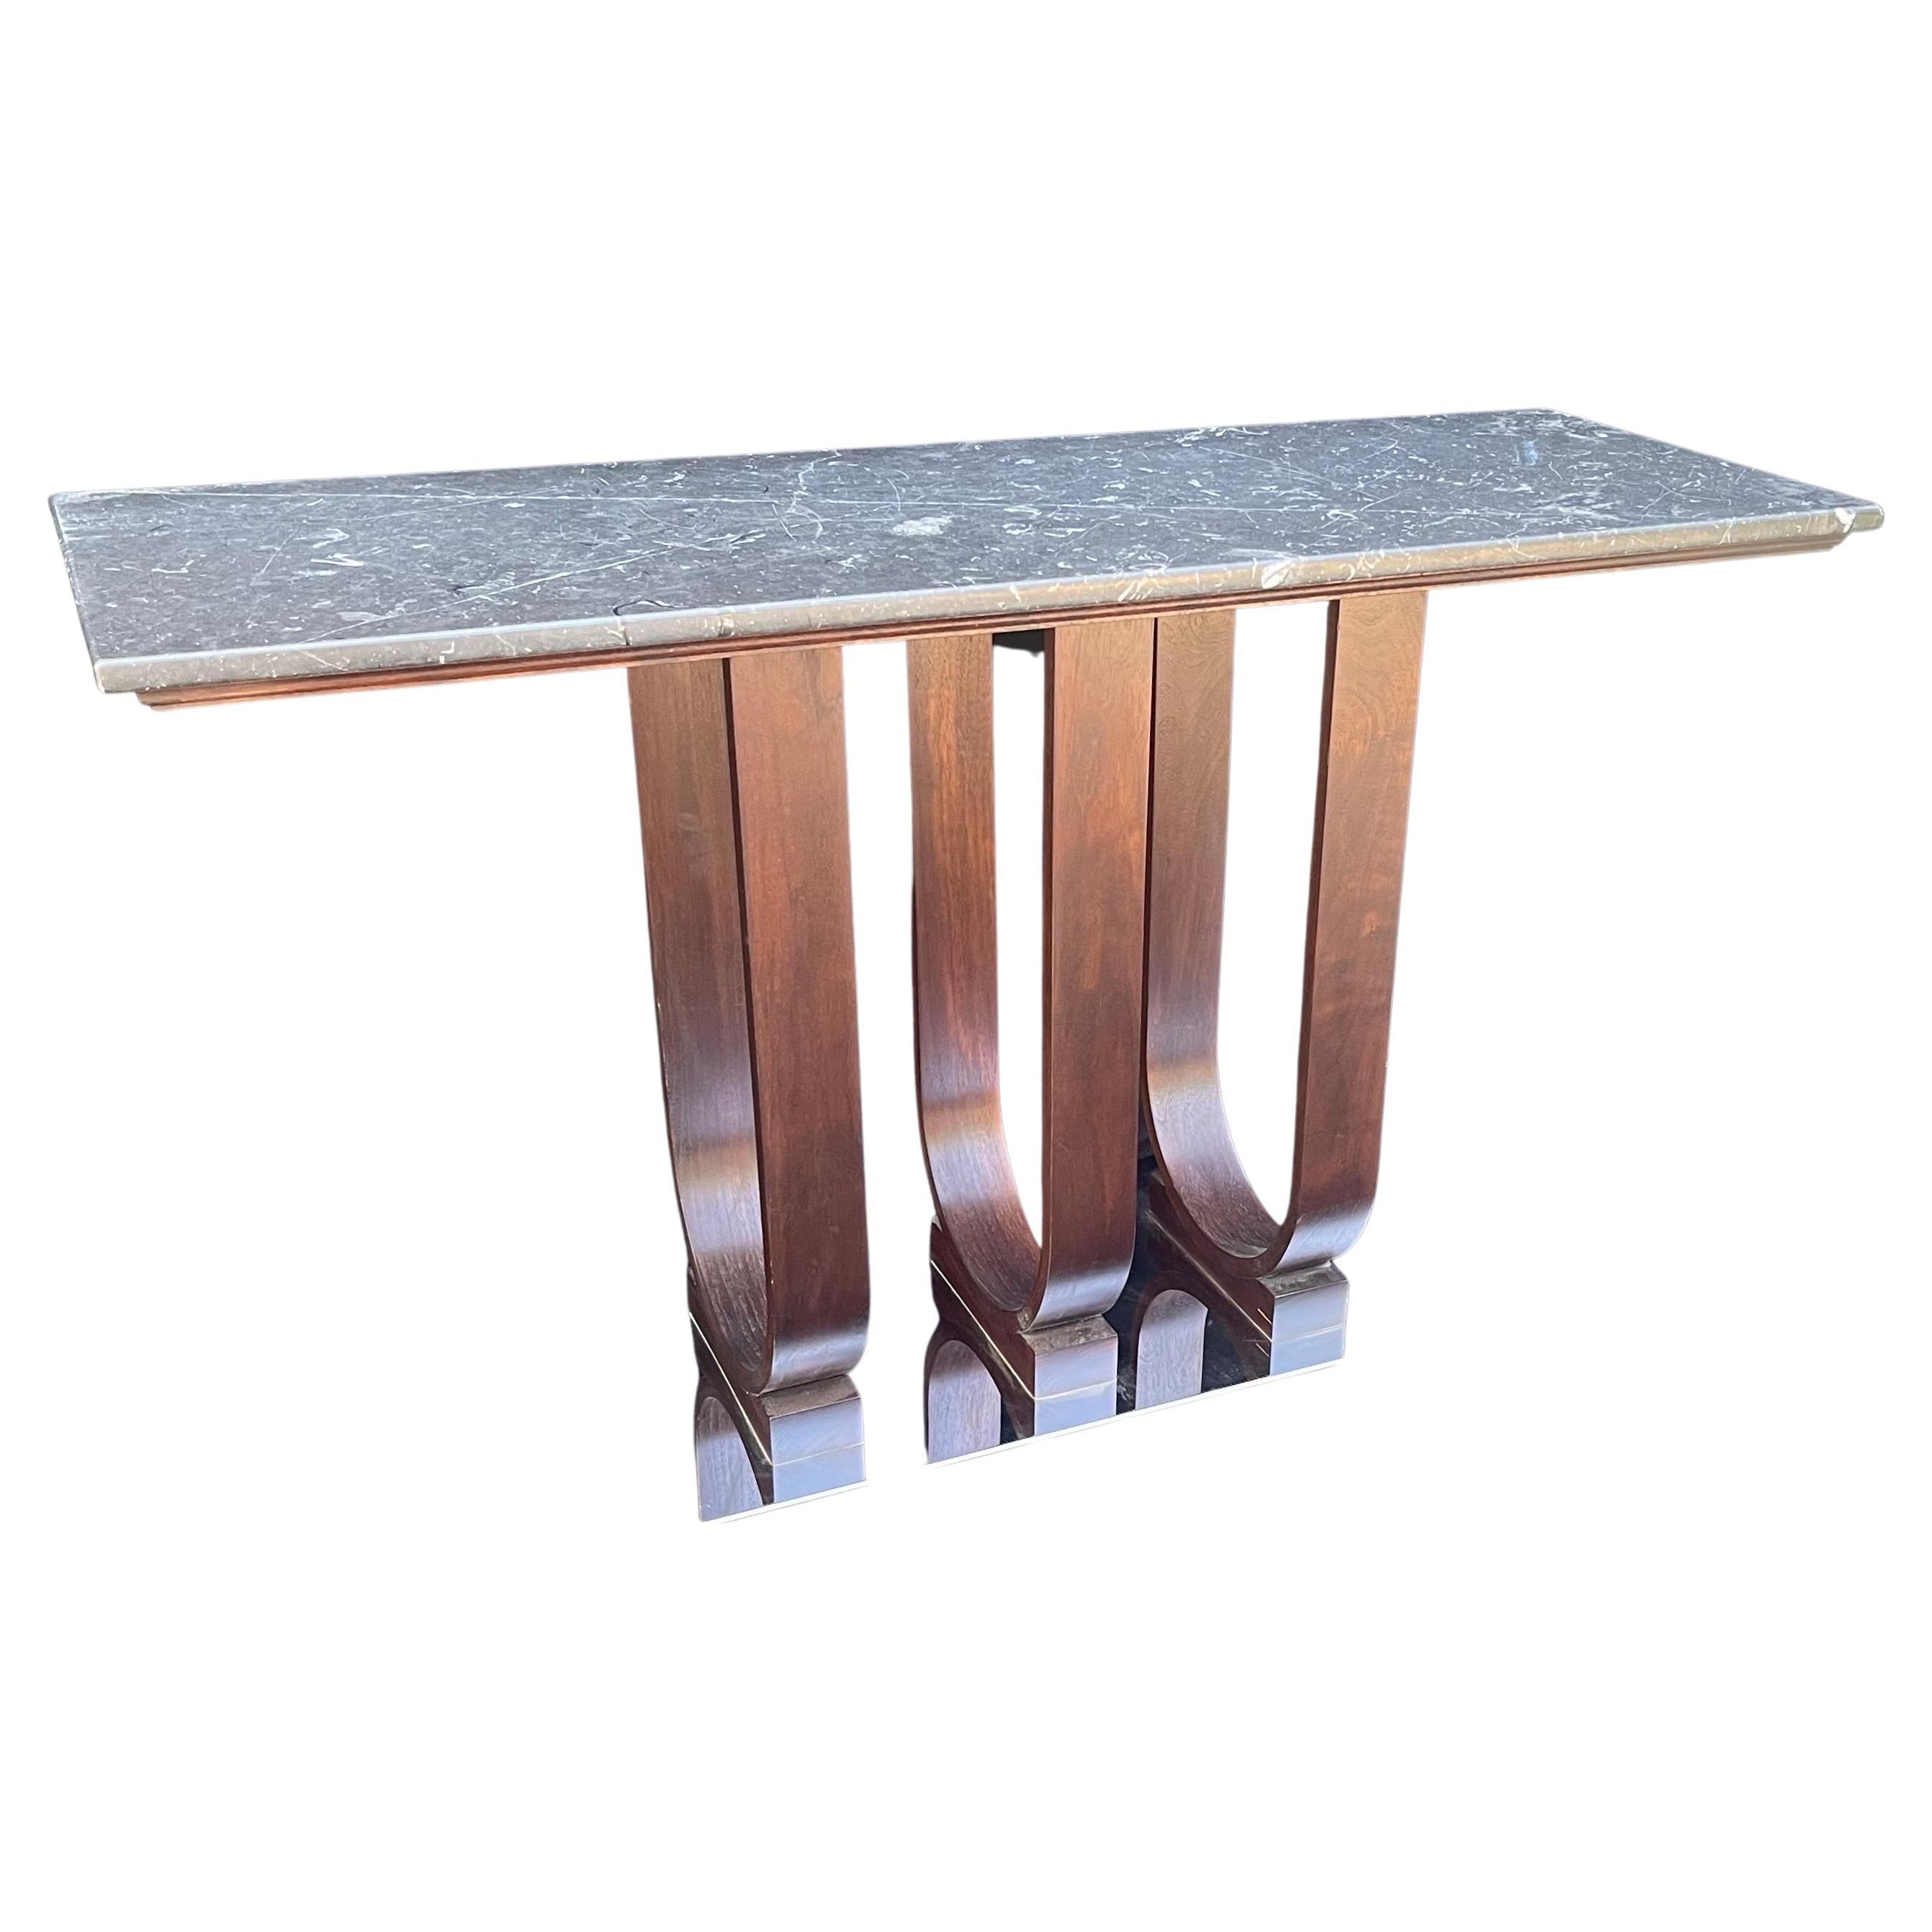 A wonderful pair of marble top Mid-Century Modern / Art Deco Style console tables raised on chrome base.